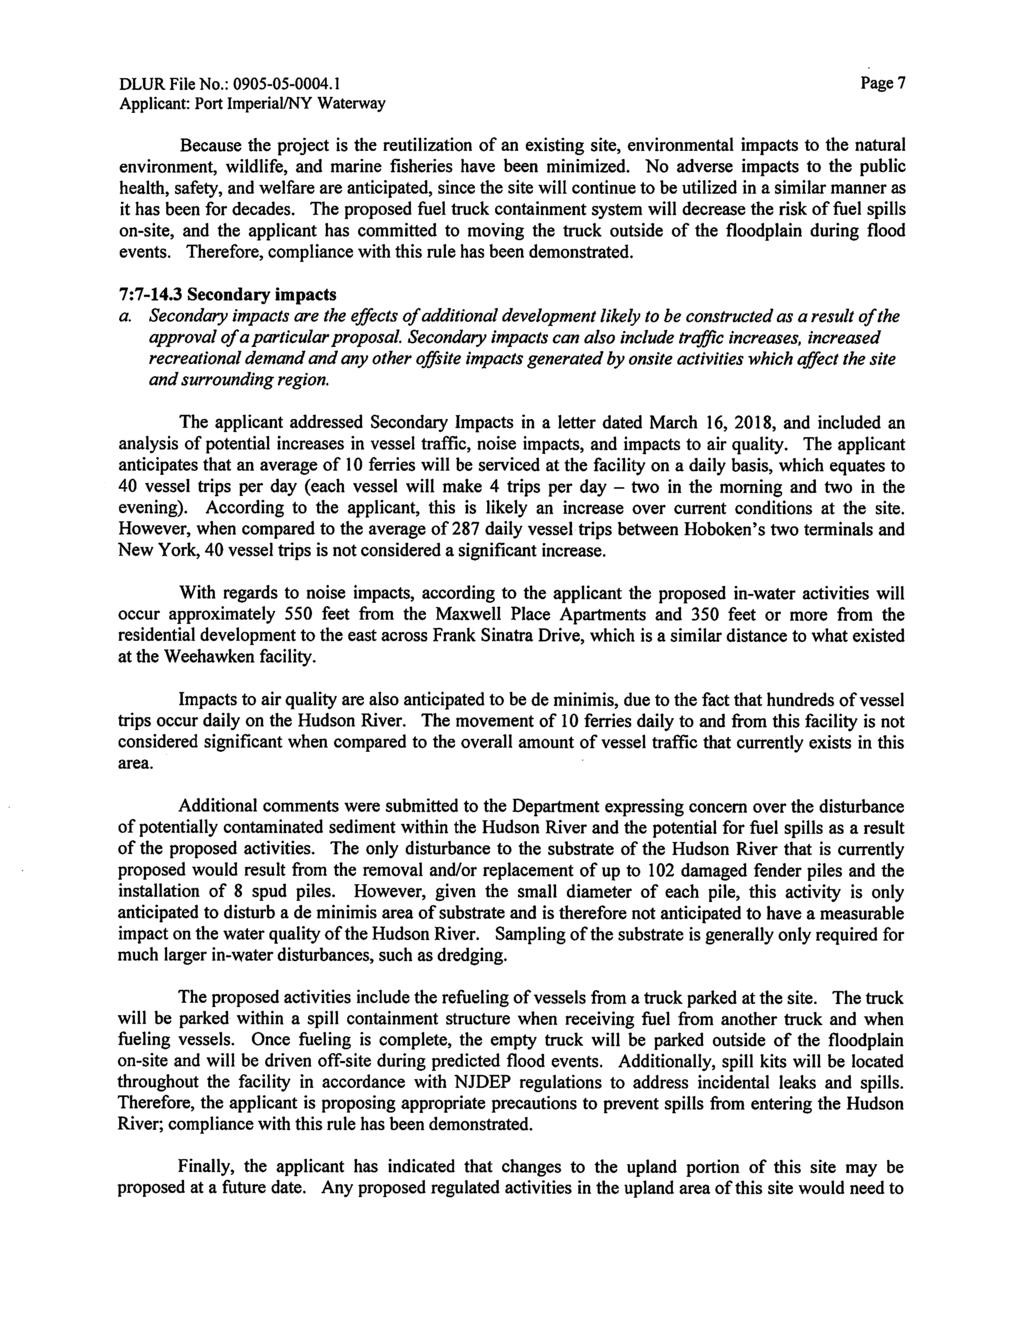 DLUR File No.: 0905-05-0004.1 Page 7 Because the project is the reutilization of an existing site, environmental impacts to the natural environment, wildlife, and marine fisheries have been minimized.